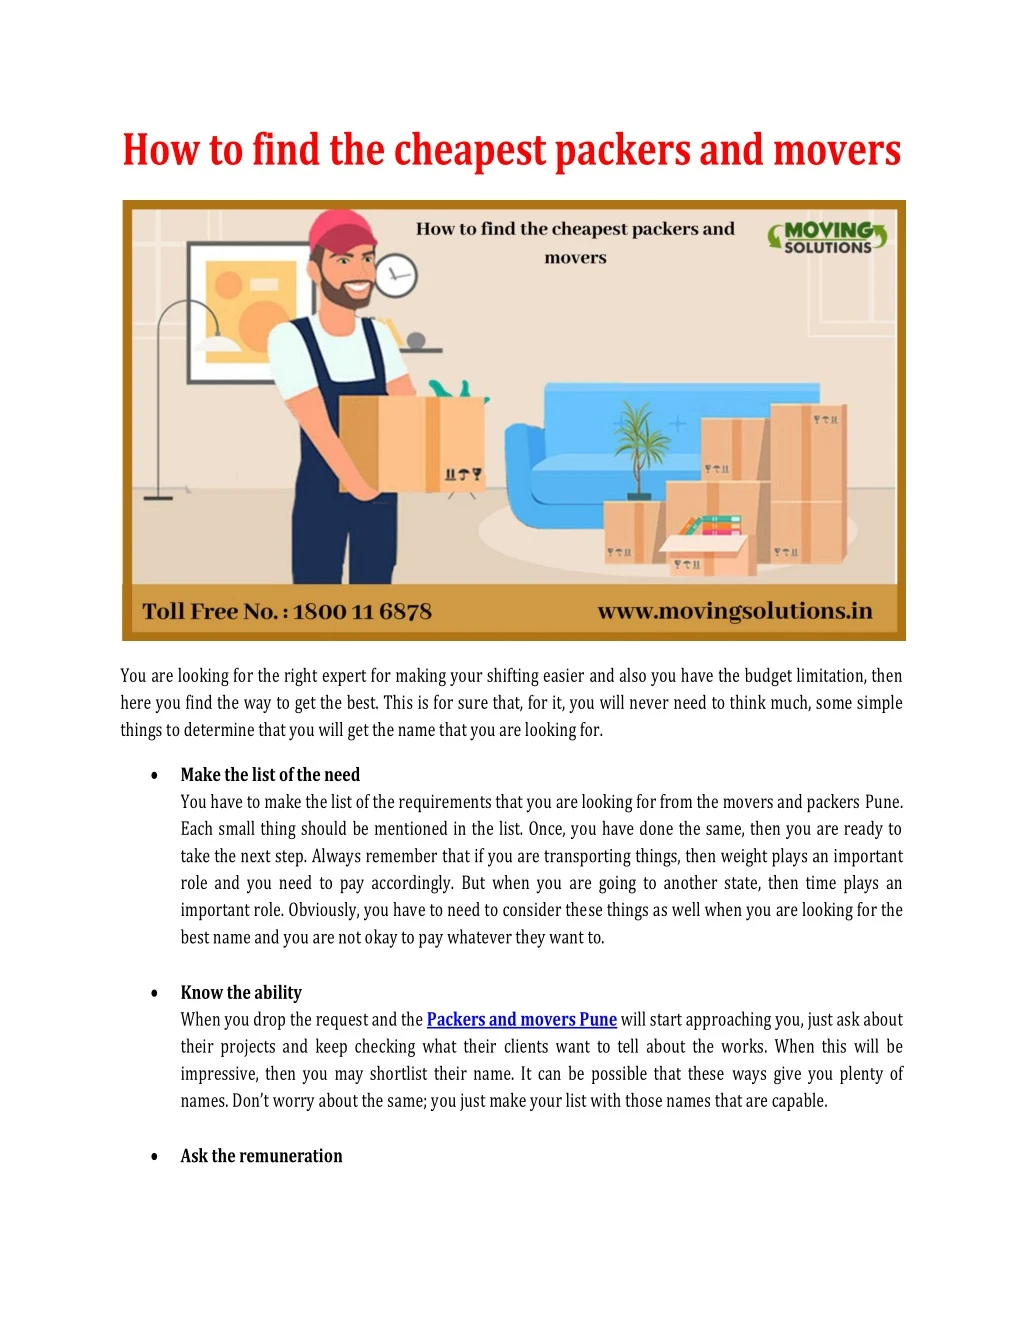 how to find the cheapest packers and movers